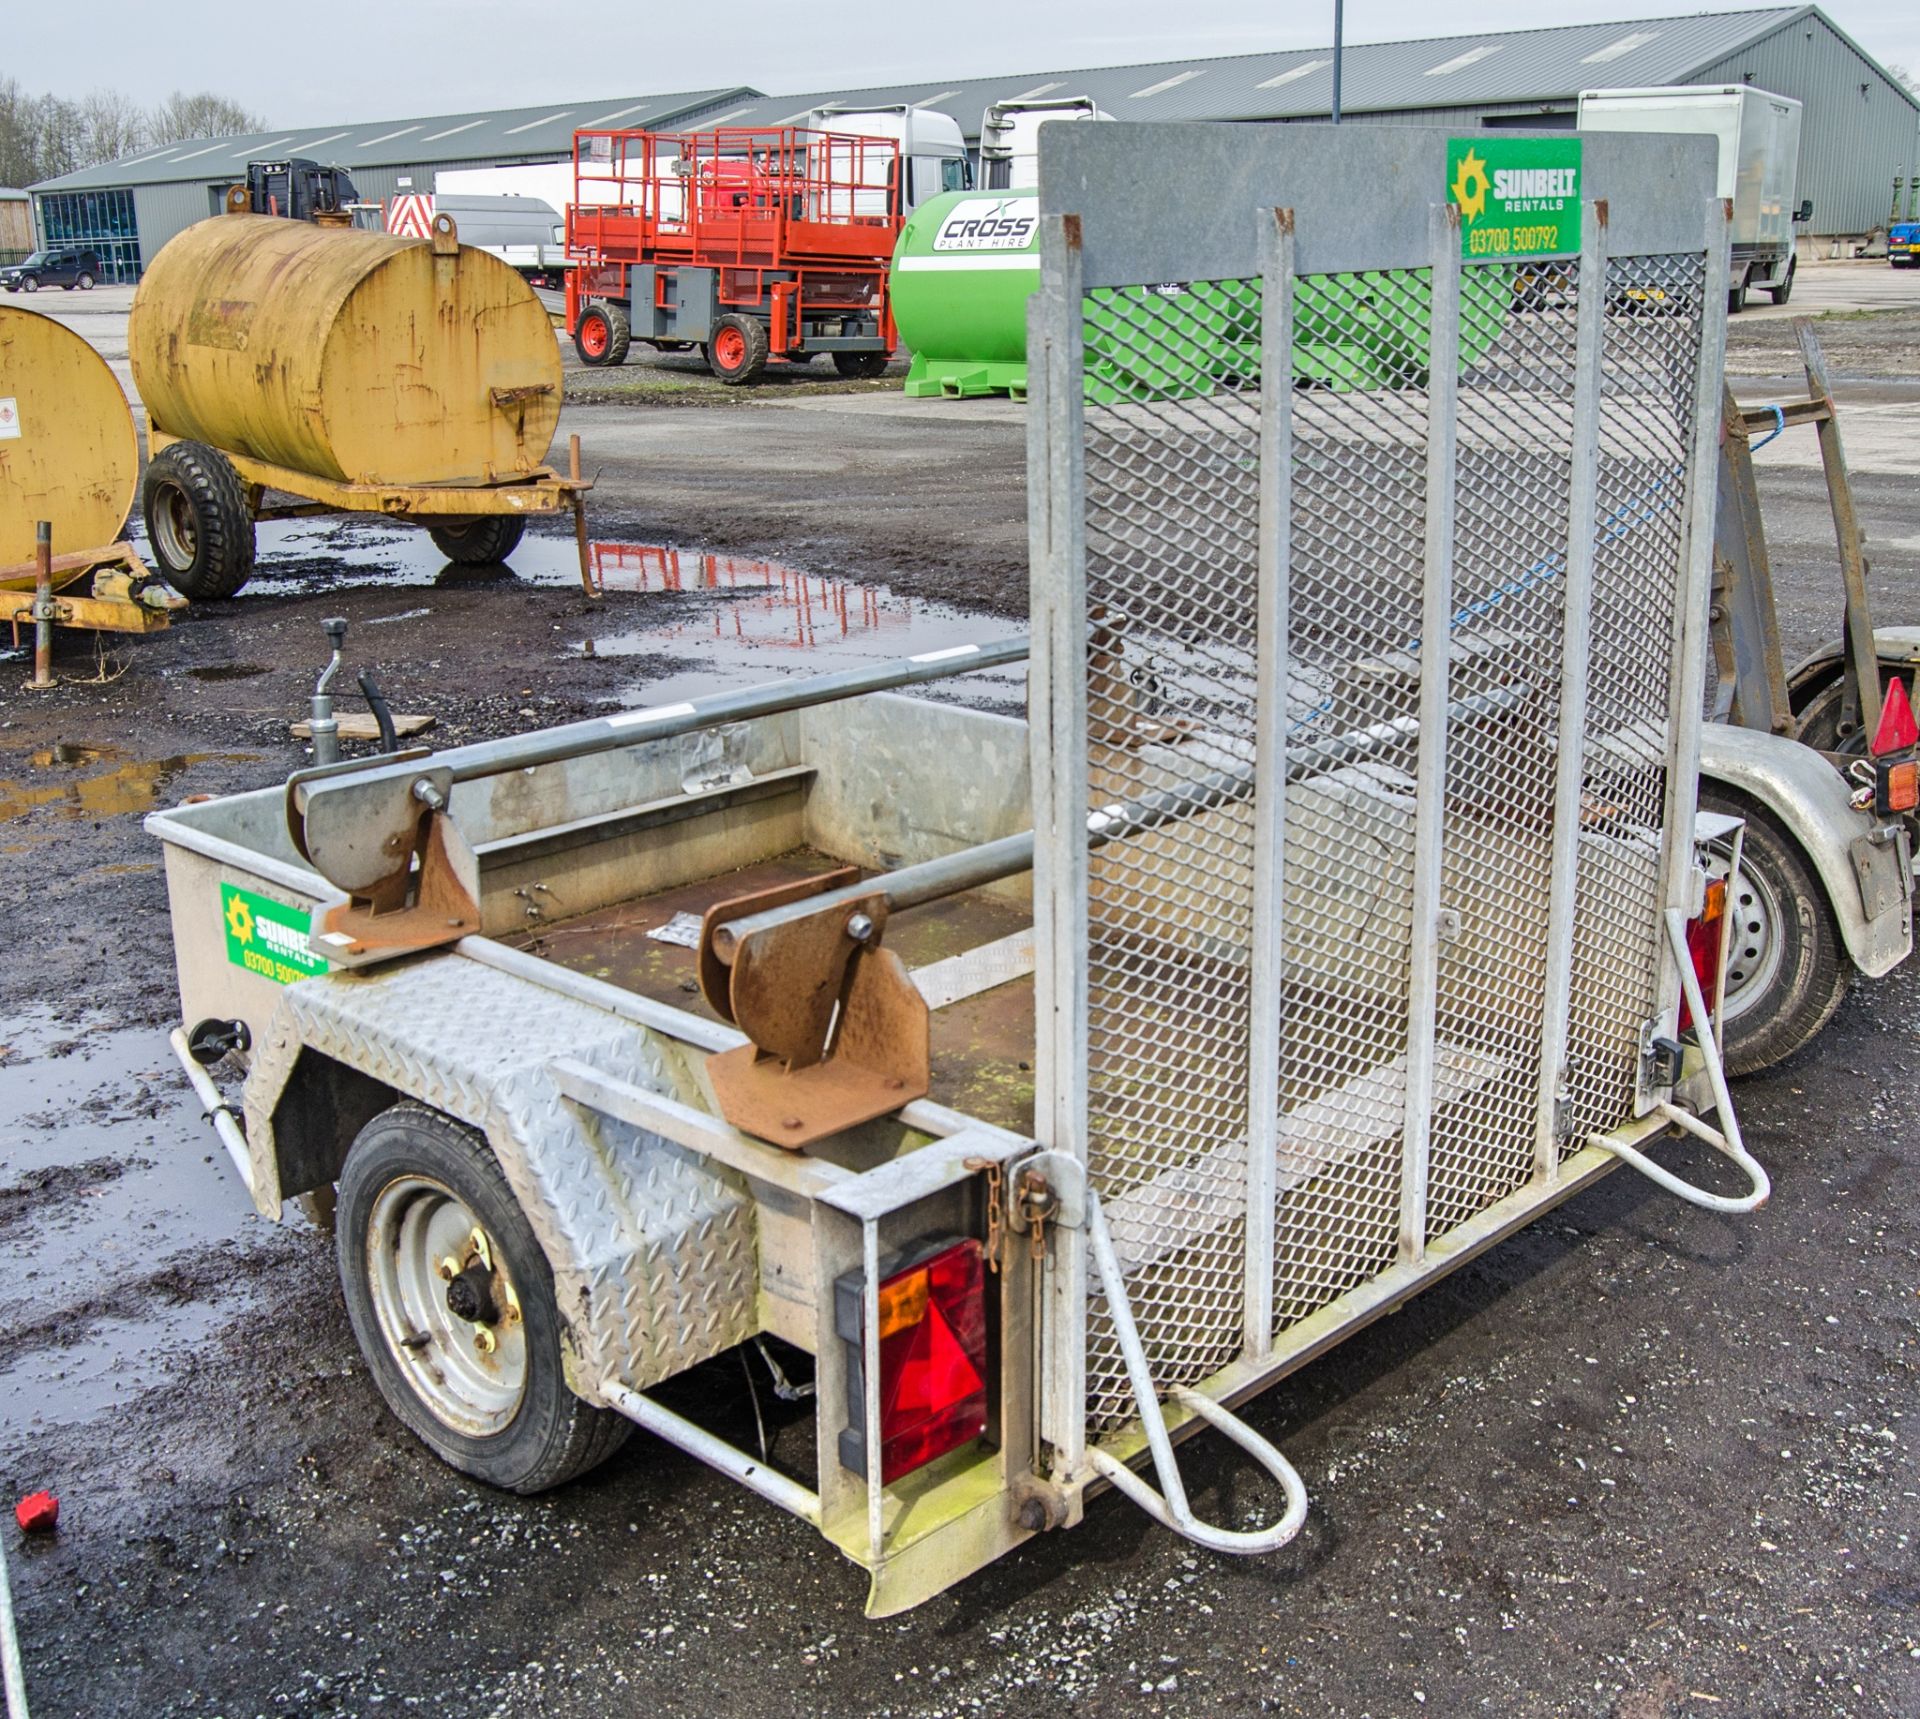 Hazlewood single axle traffic light trailer Bed size: 4ft 7 inch wide x 6ft long A541599 - Image 4 of 5